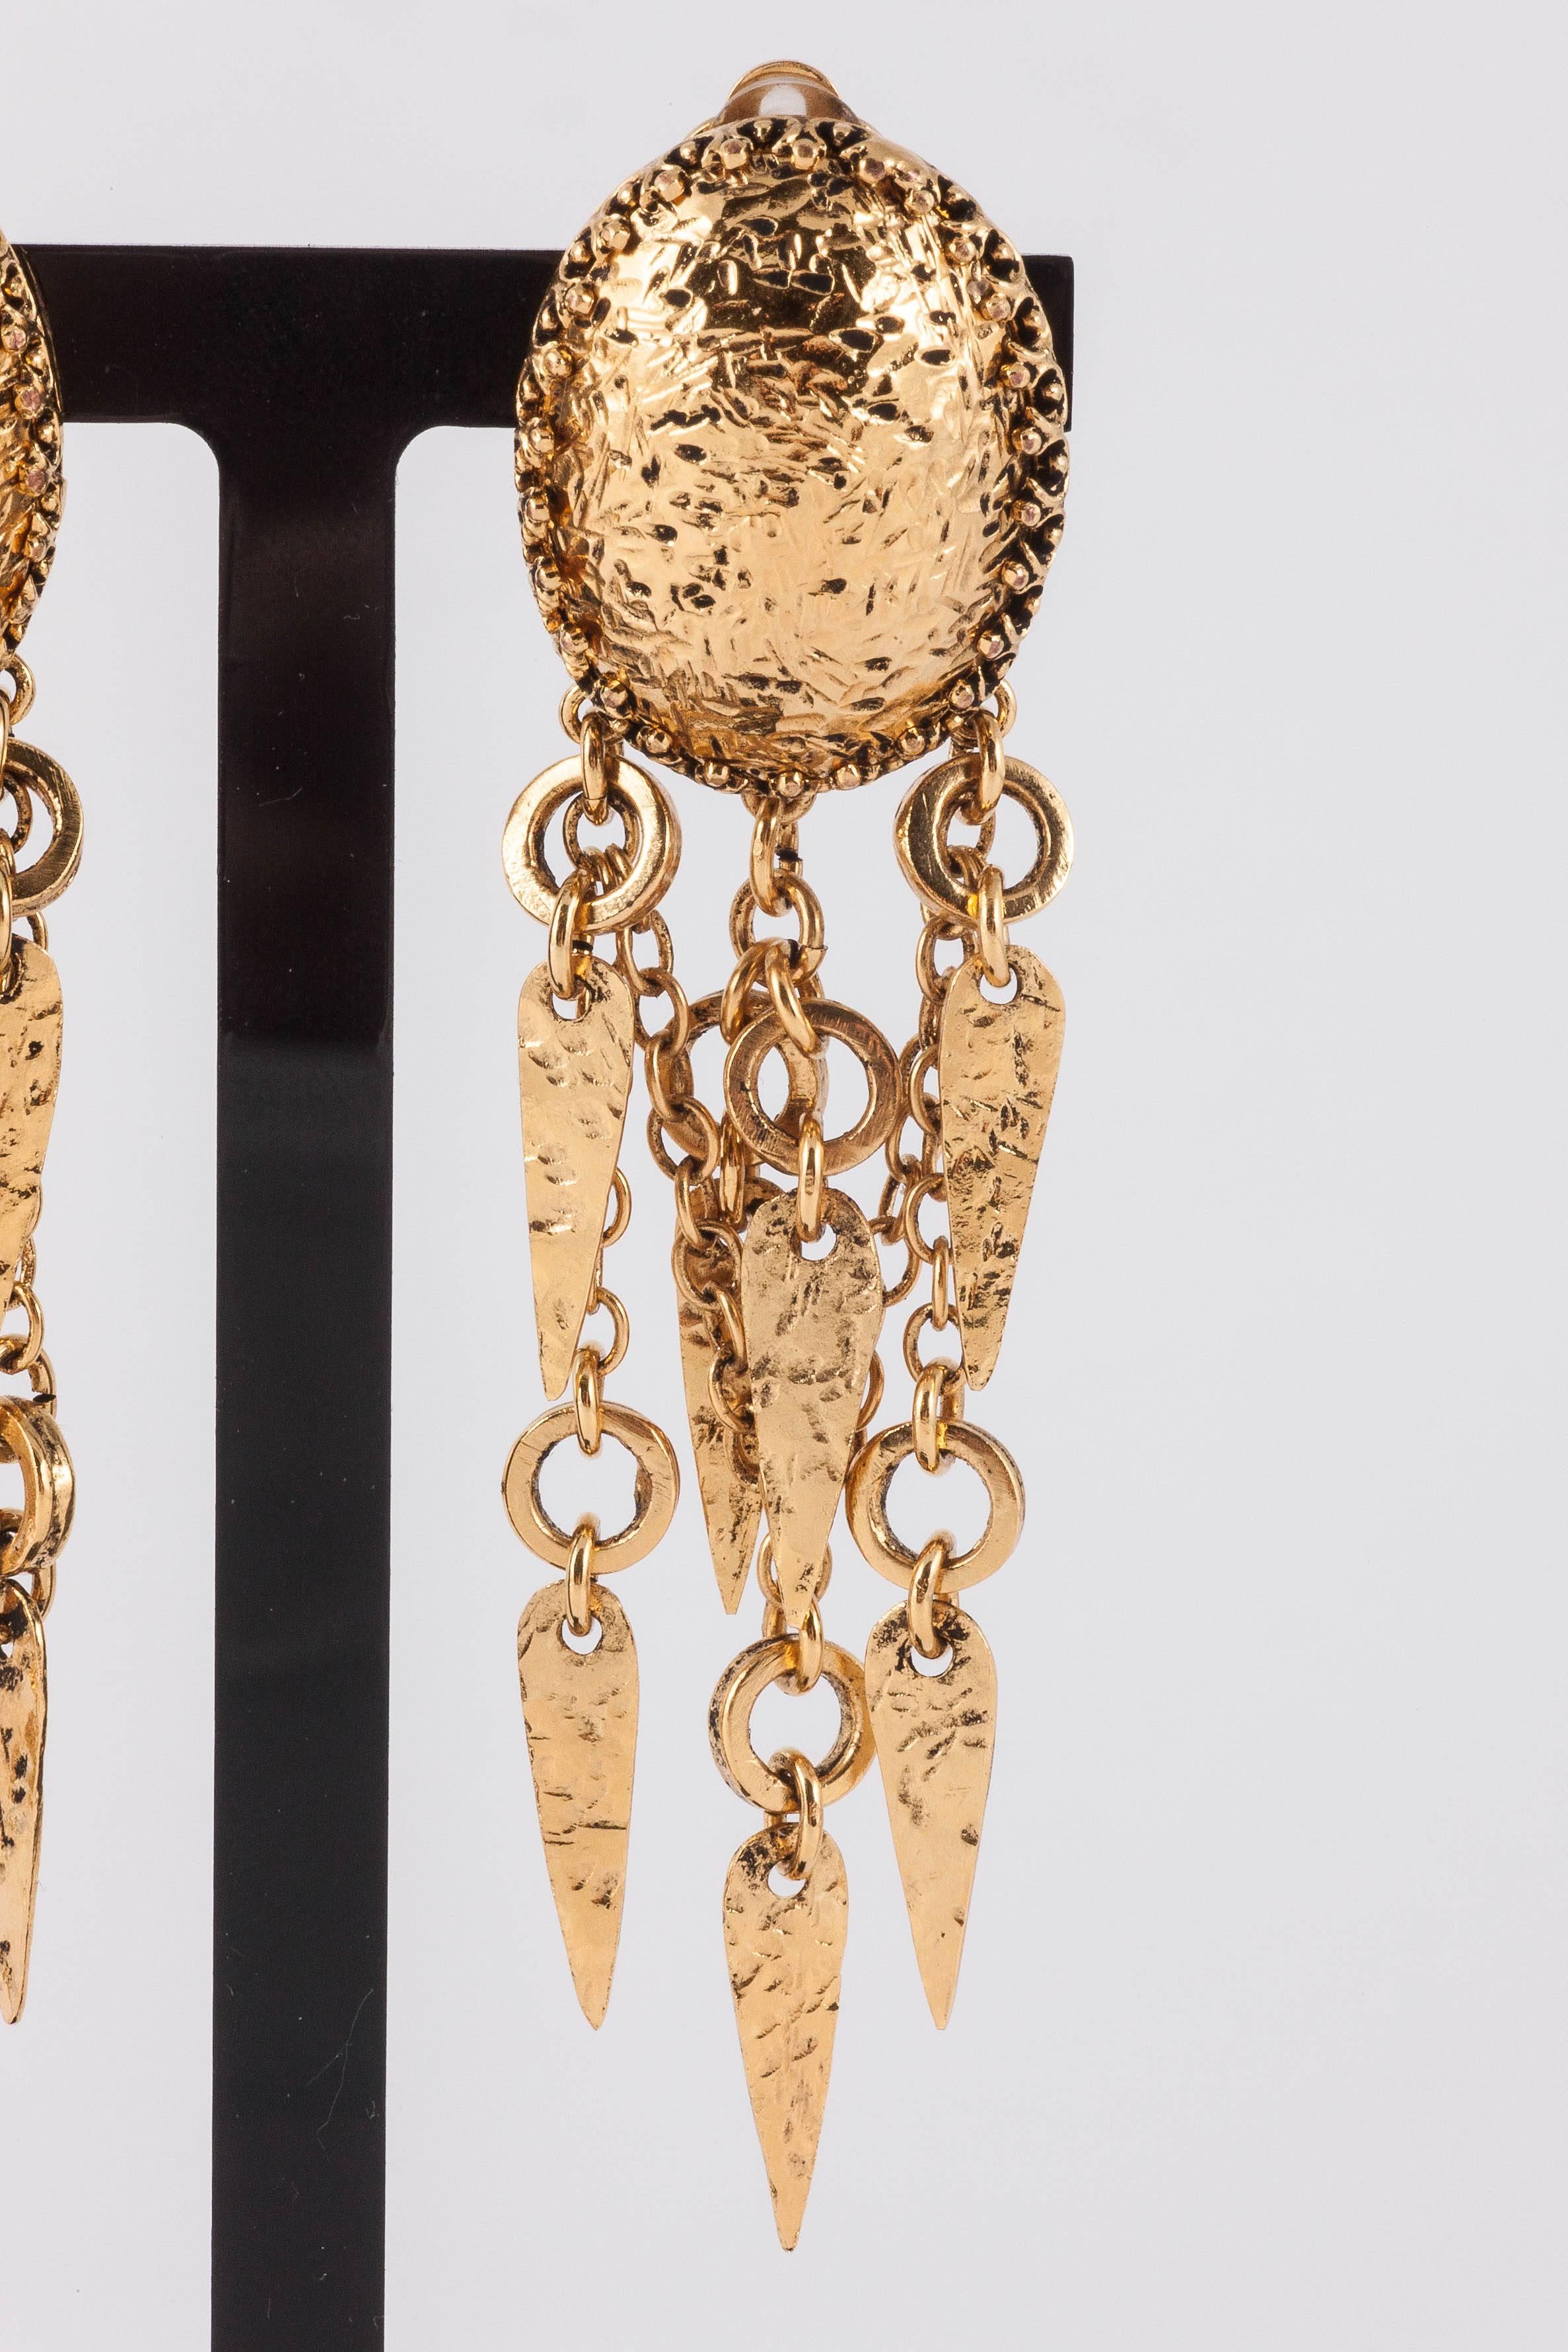 Hammered  gilt metal 'shard' earrings from the WW collection, a contemporary limited edition hand made in Paris.
Each pendant 'shard' is hand cut and gently beaten to give the rich texture, attached to a ring and chain, then plated in a bright,